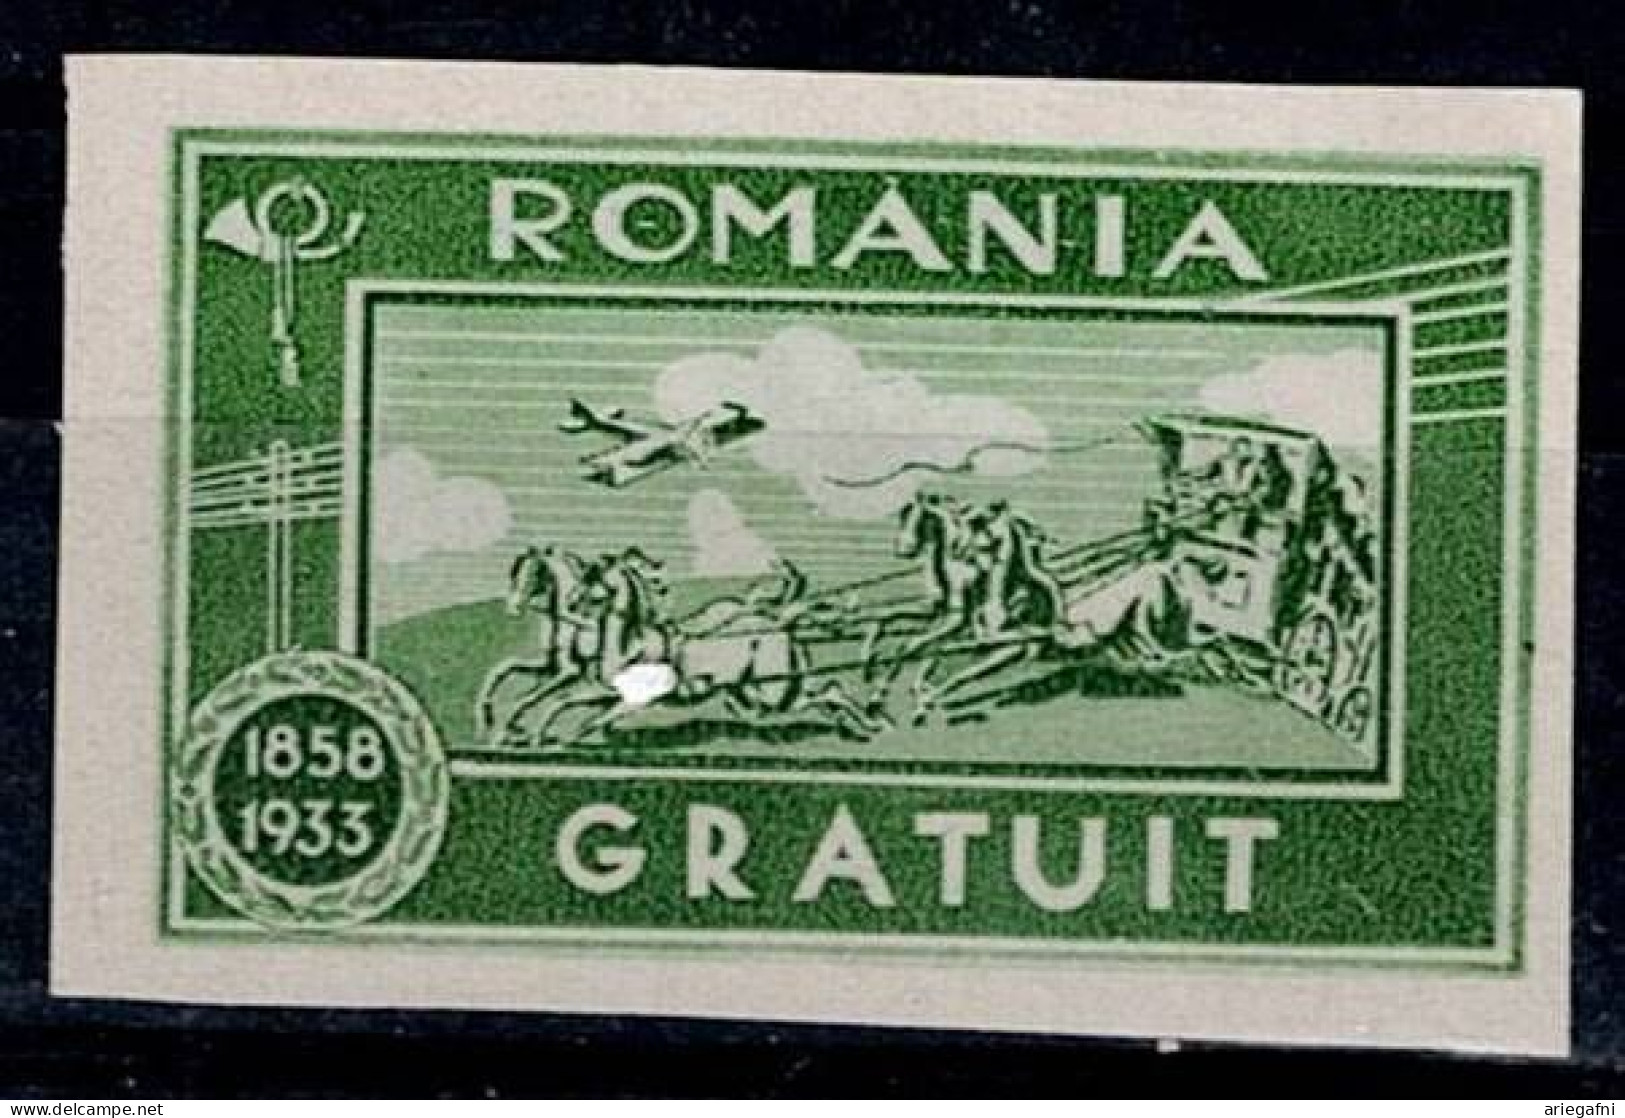 ROMANIA 1933 FOR SHIPPING A WORK VIA THE ROMANIAN POST SYSTEM MI No II MLH VF!! - Impuestos